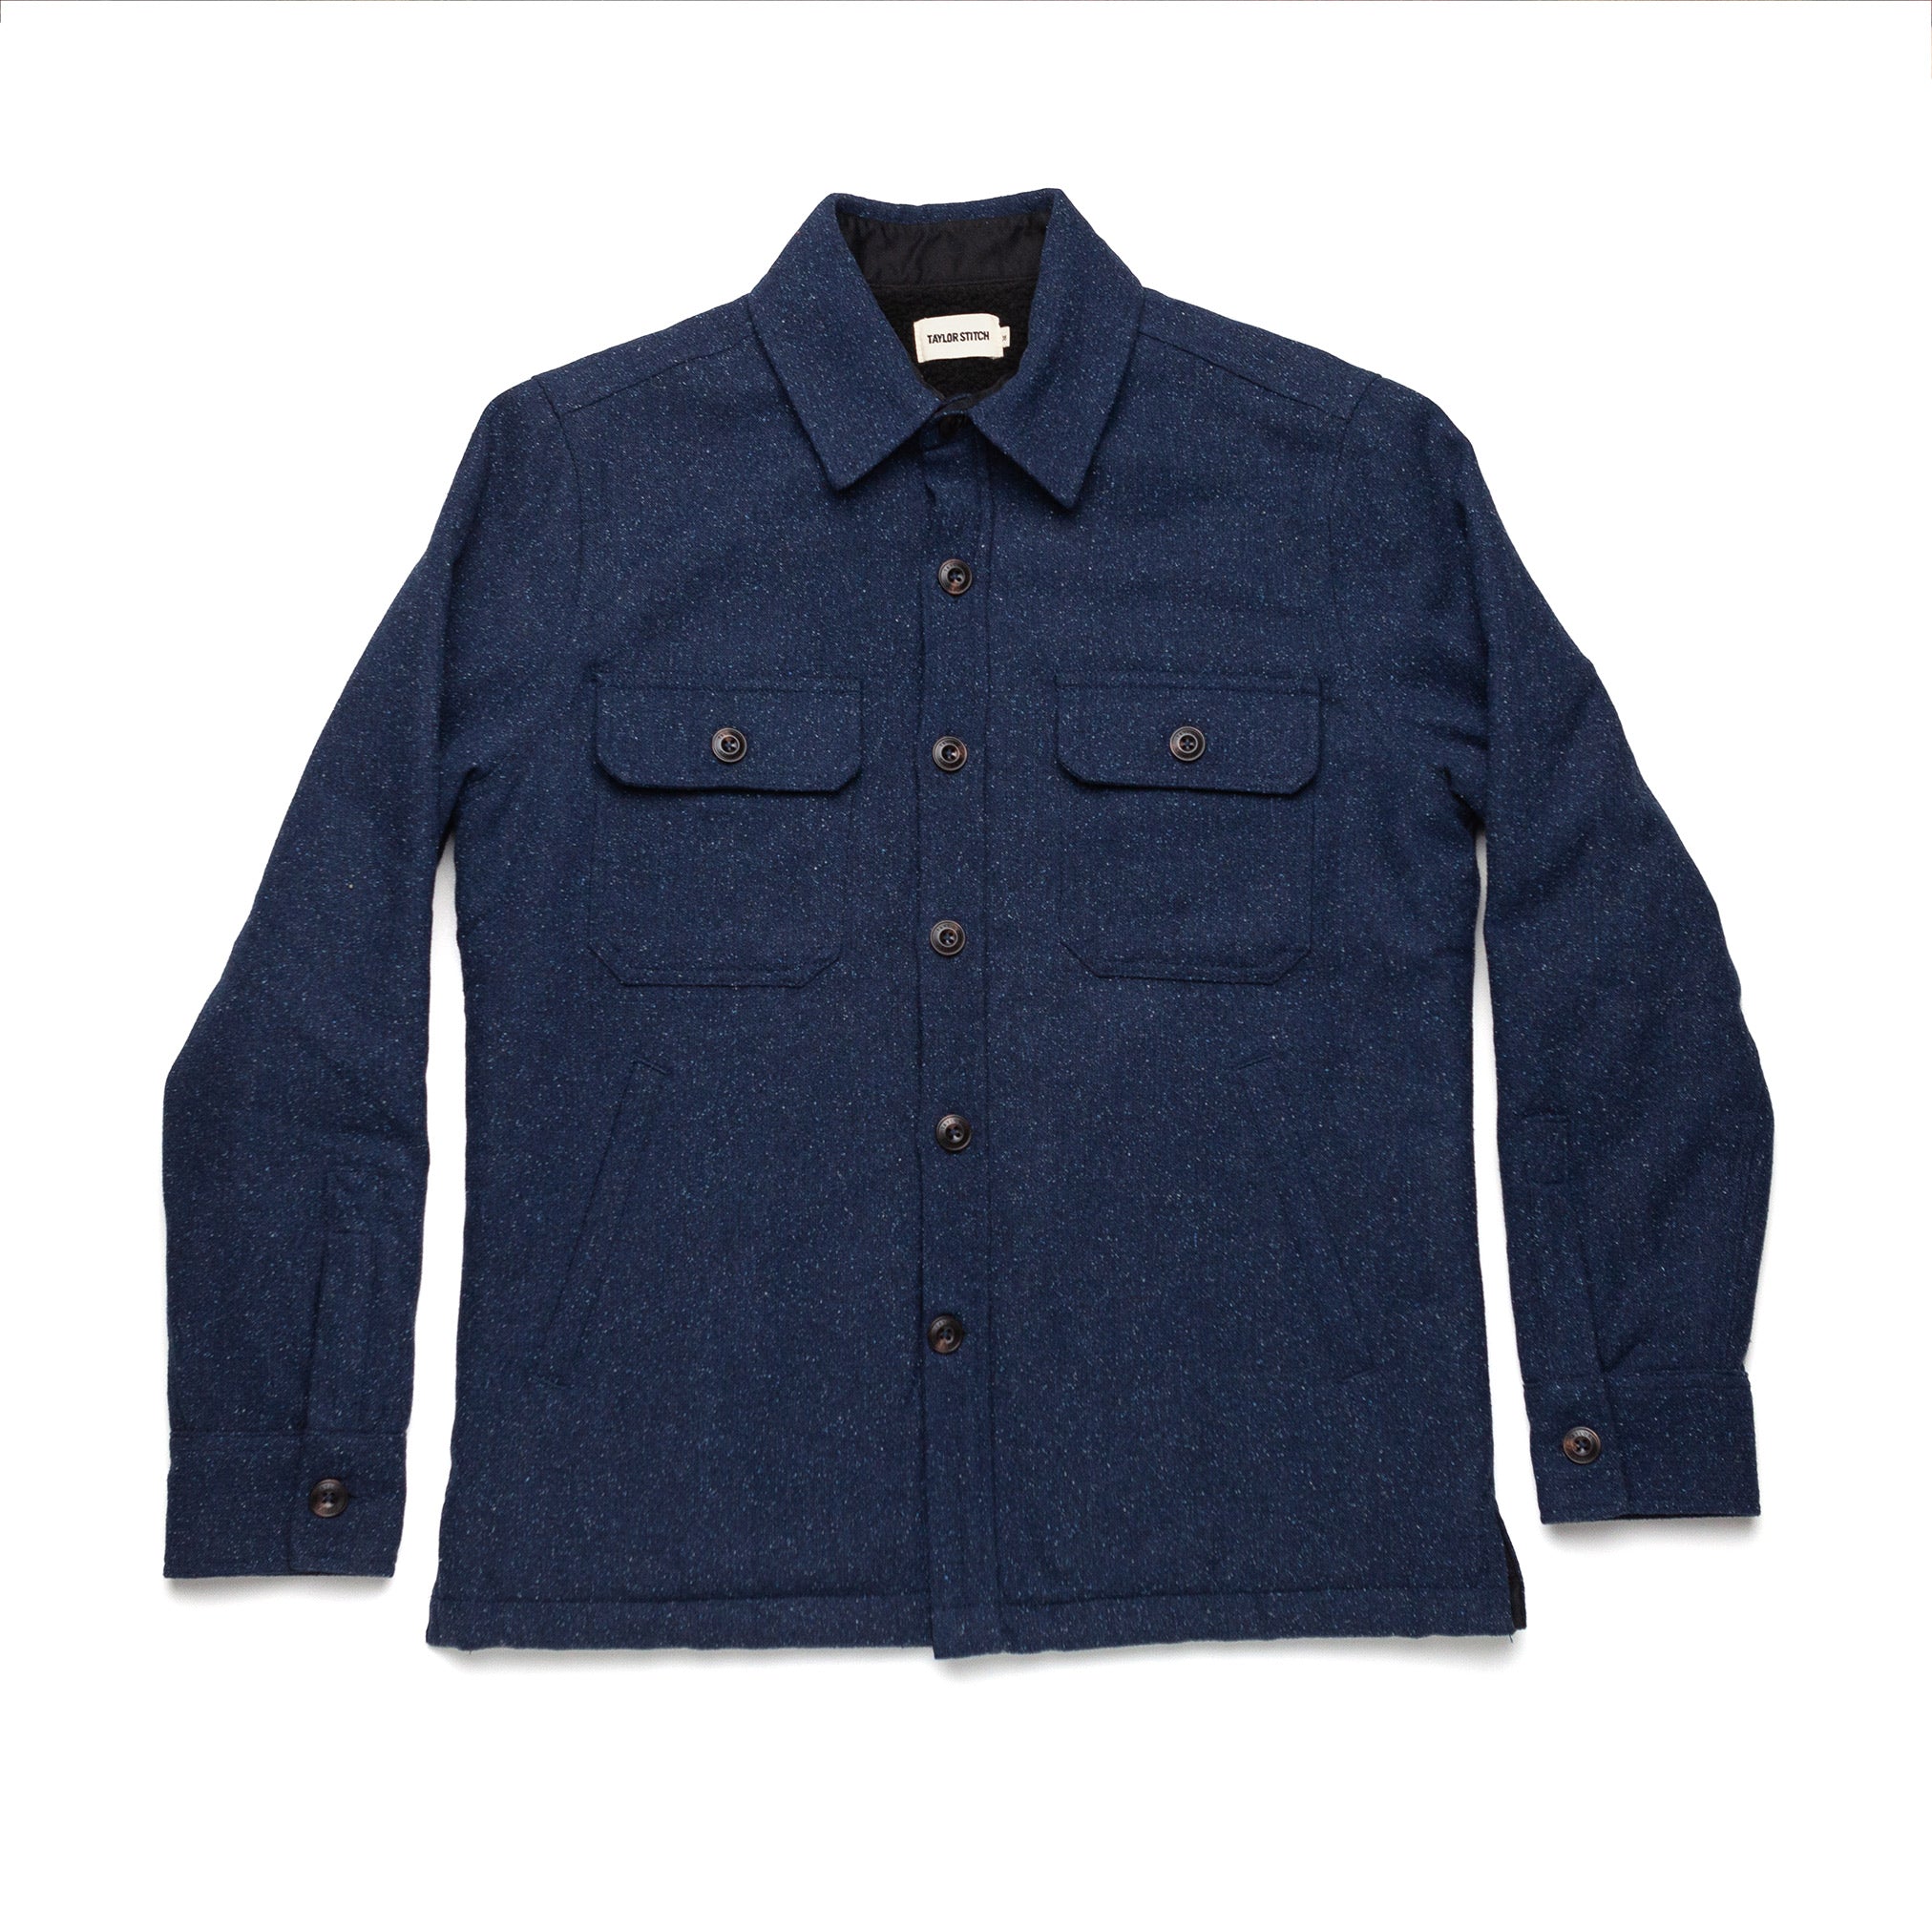 The Chandler Jacket in Navy Donegal - S/38